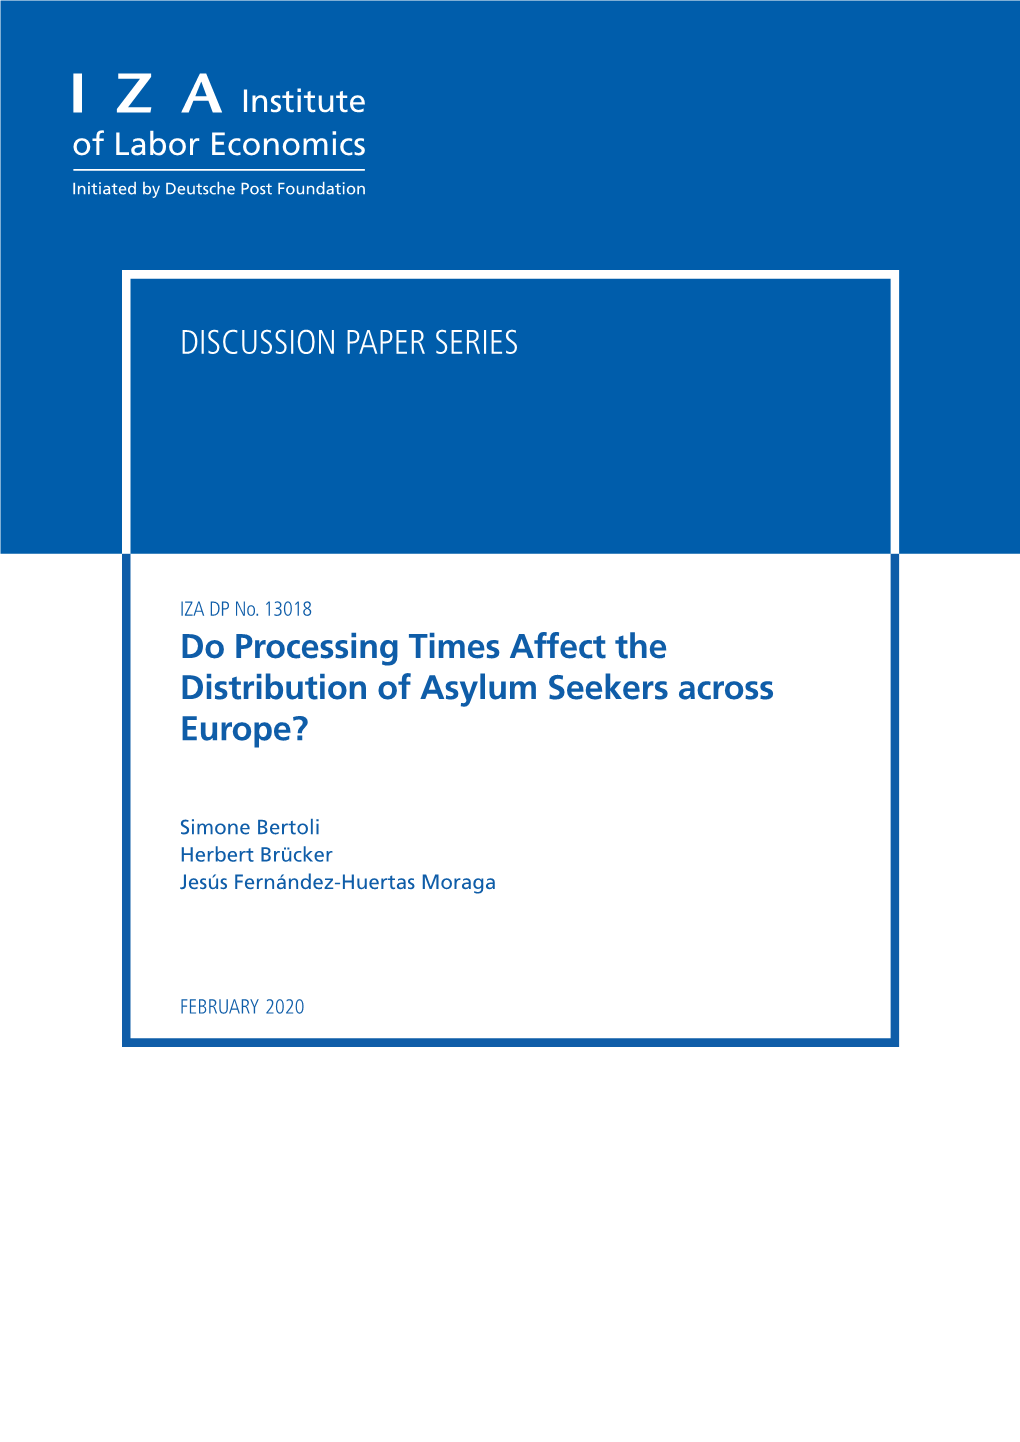 Do Processing Times Affect the Distribution of Asylum Seekers Across Europe?